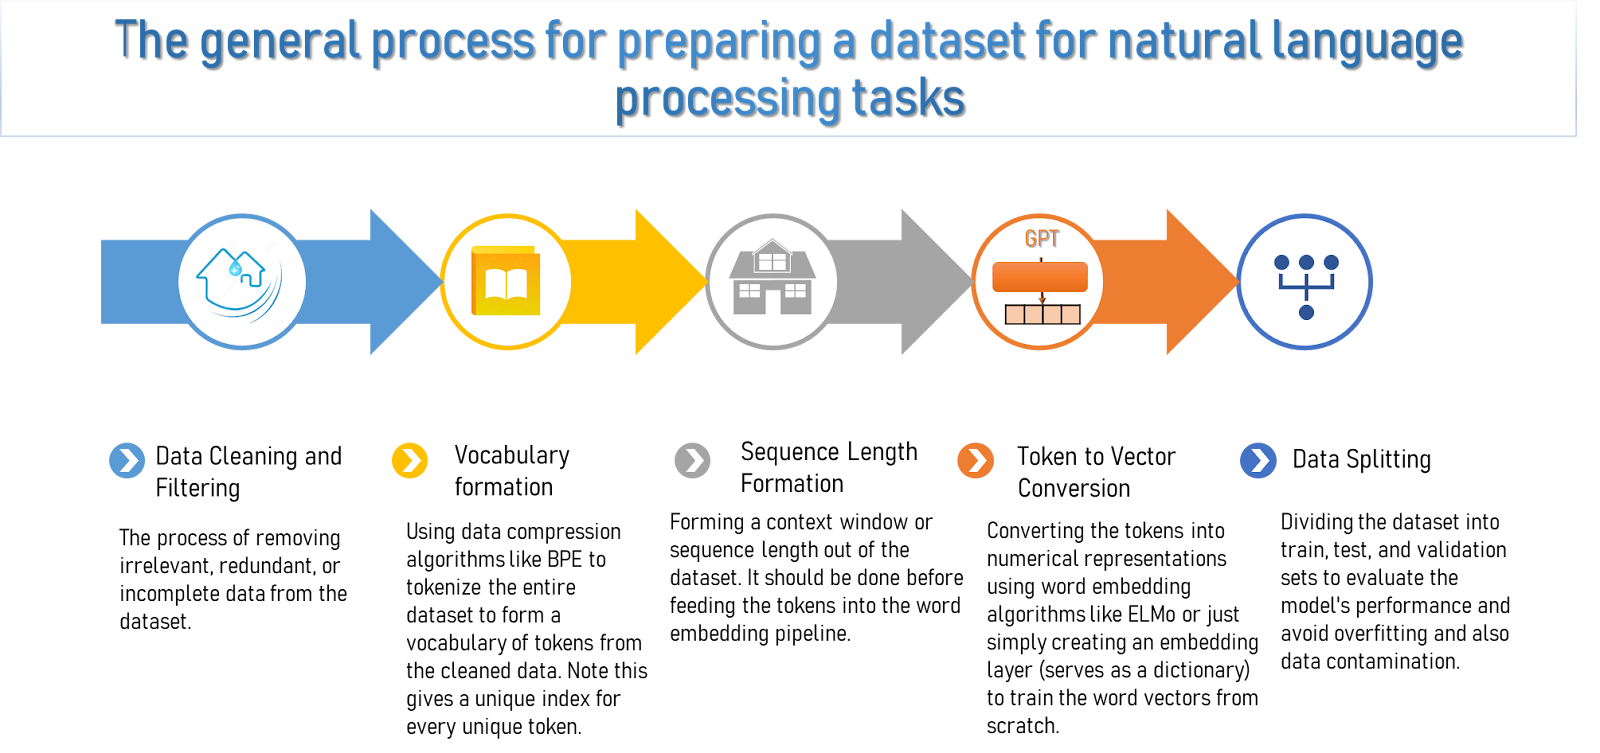 The general process for processing a dataset for natural language processing tasks